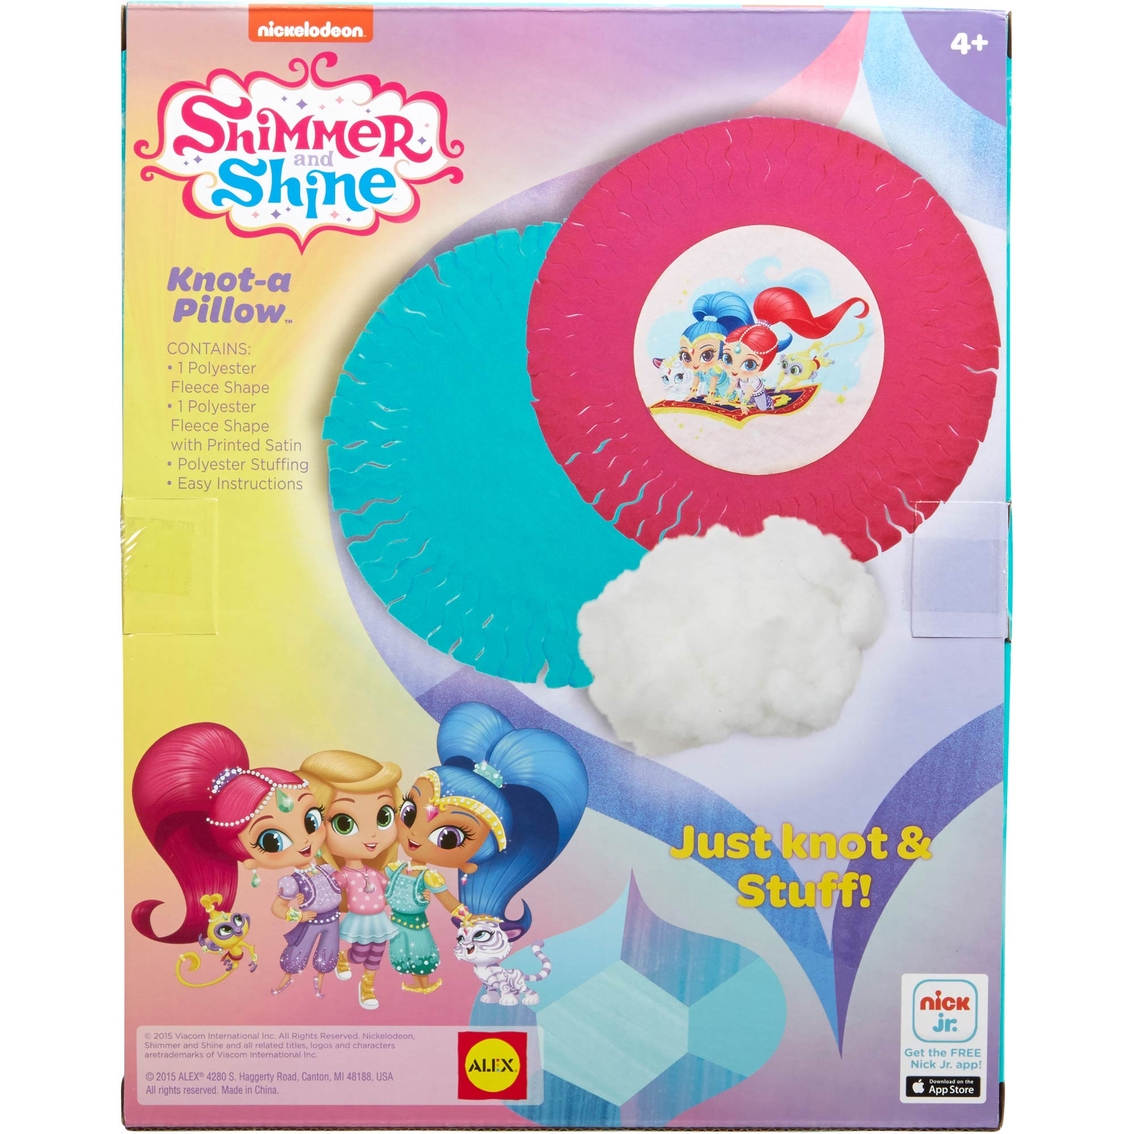 Alex Toys Shimmer and Shine Knot A Pillow - Image 2 of 3